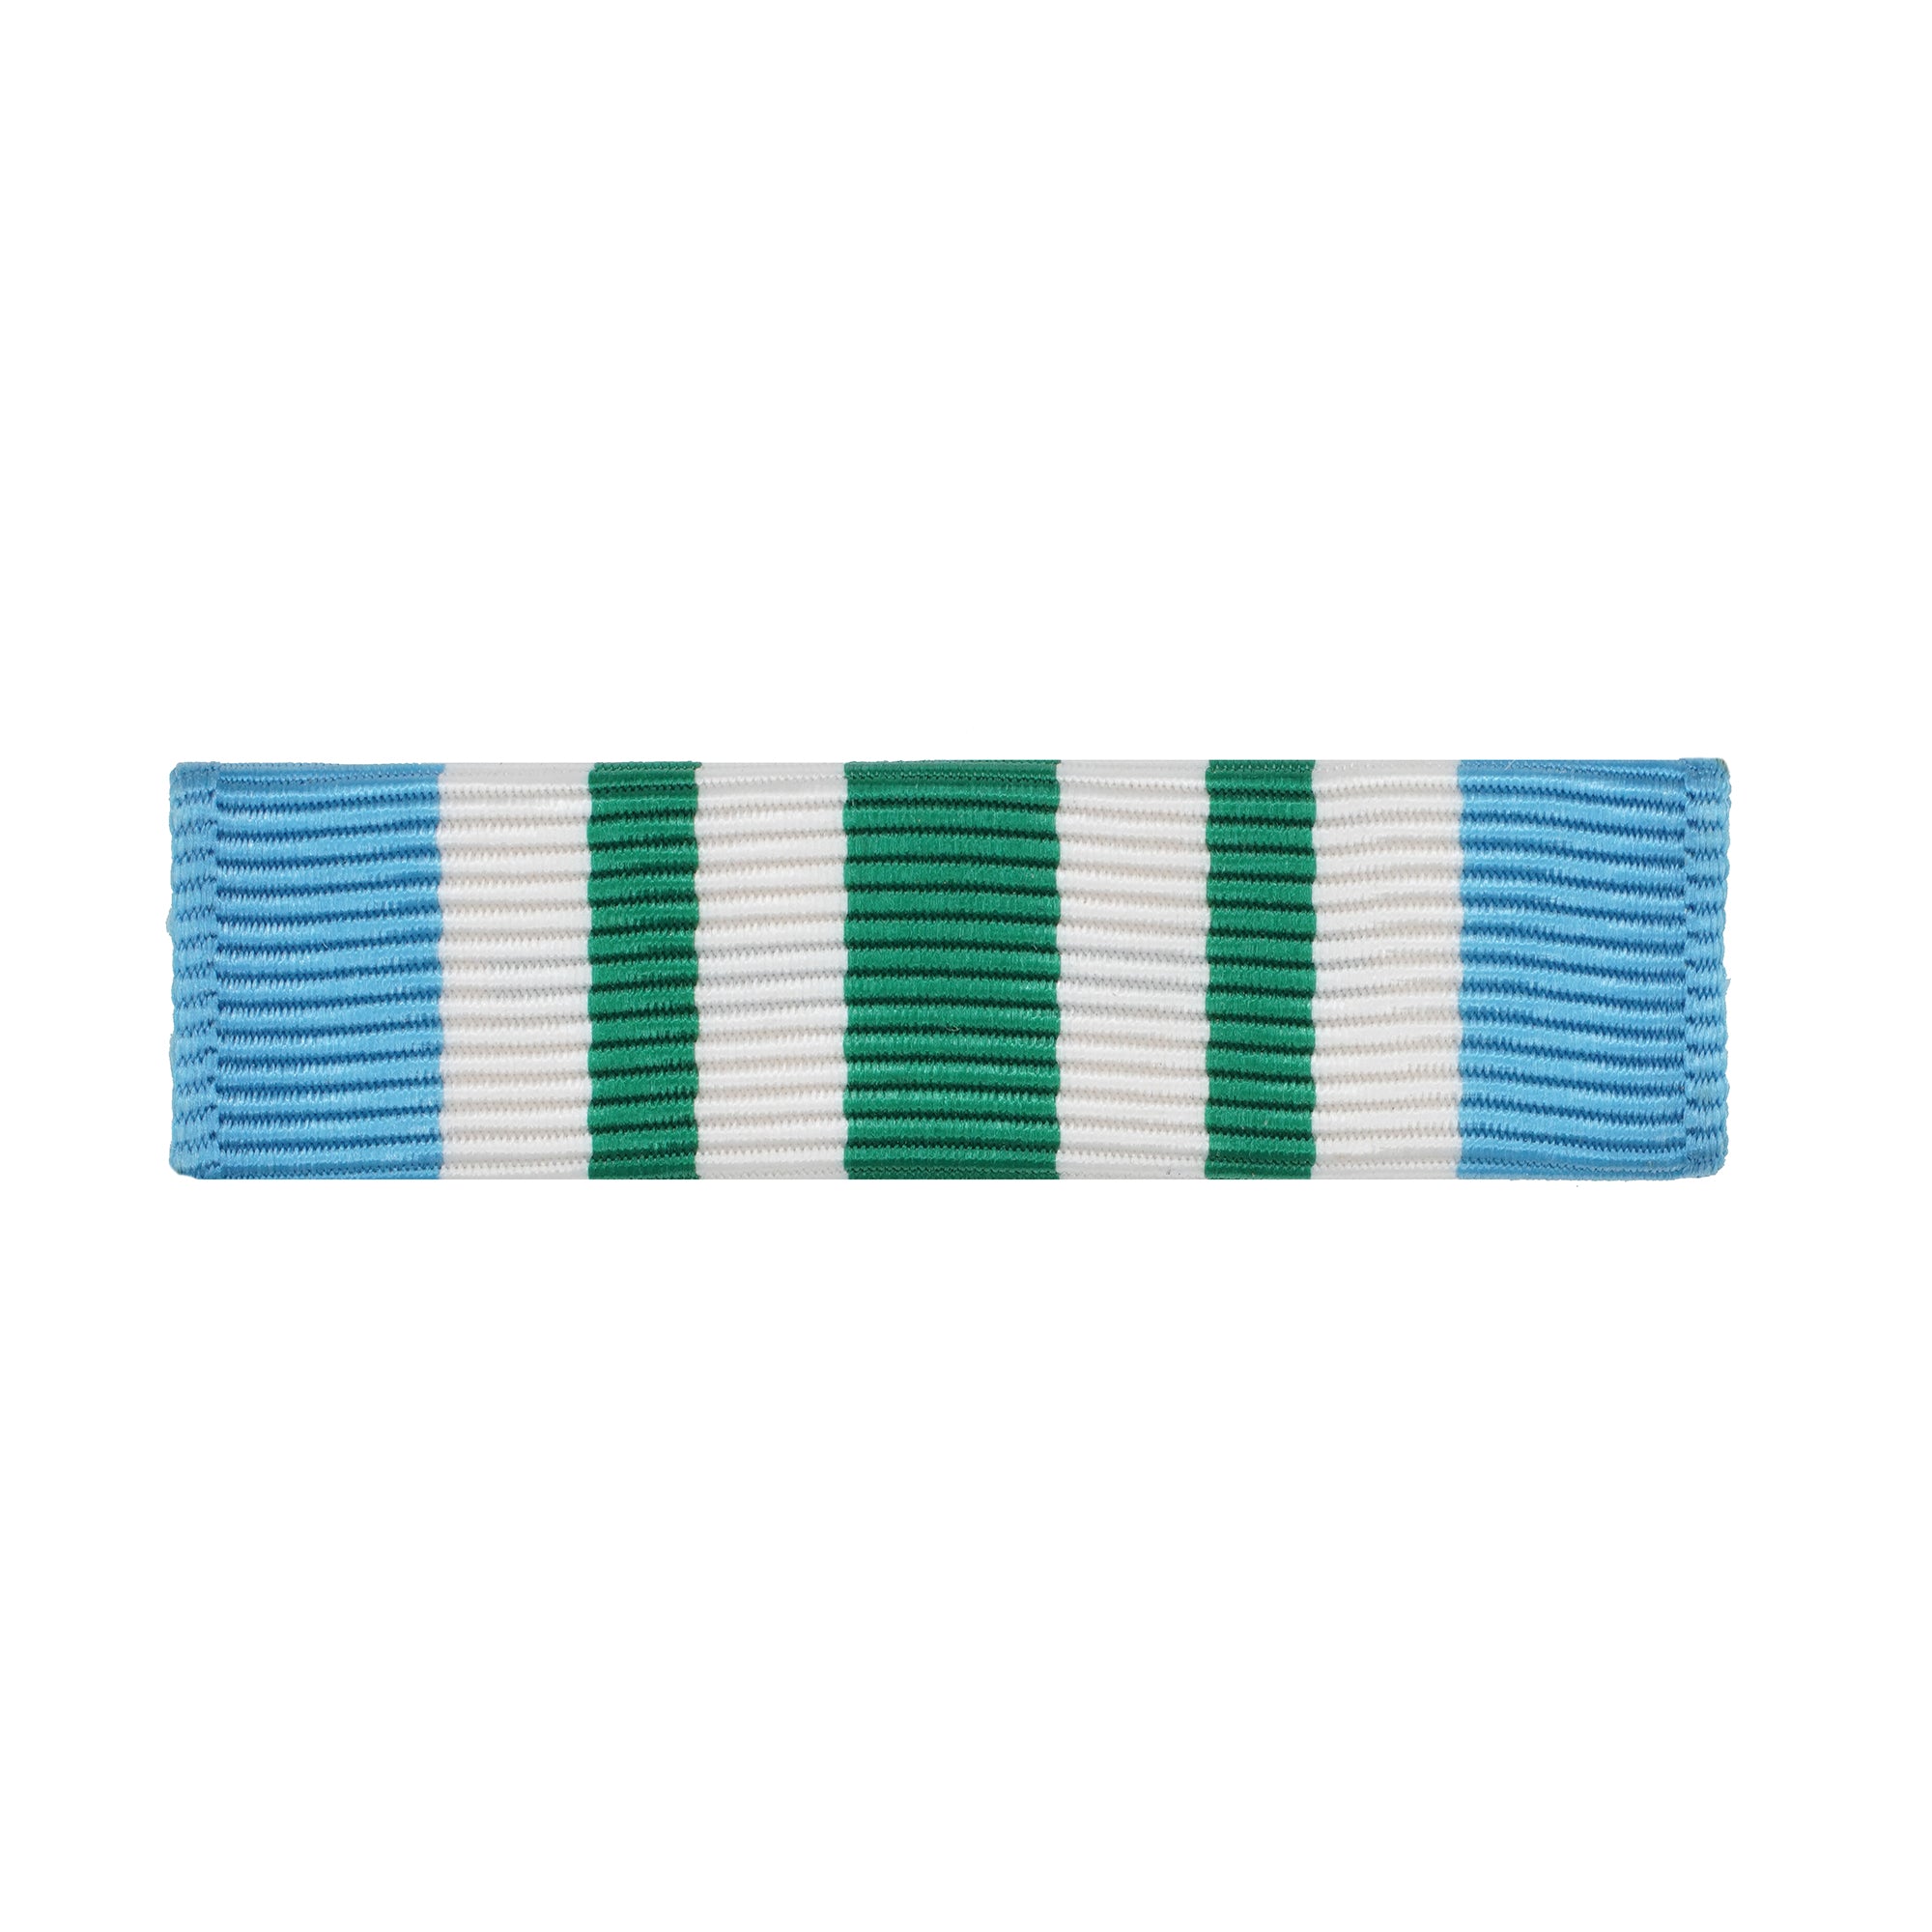 Joint Service Commendation Ribbon - Insignia Depot